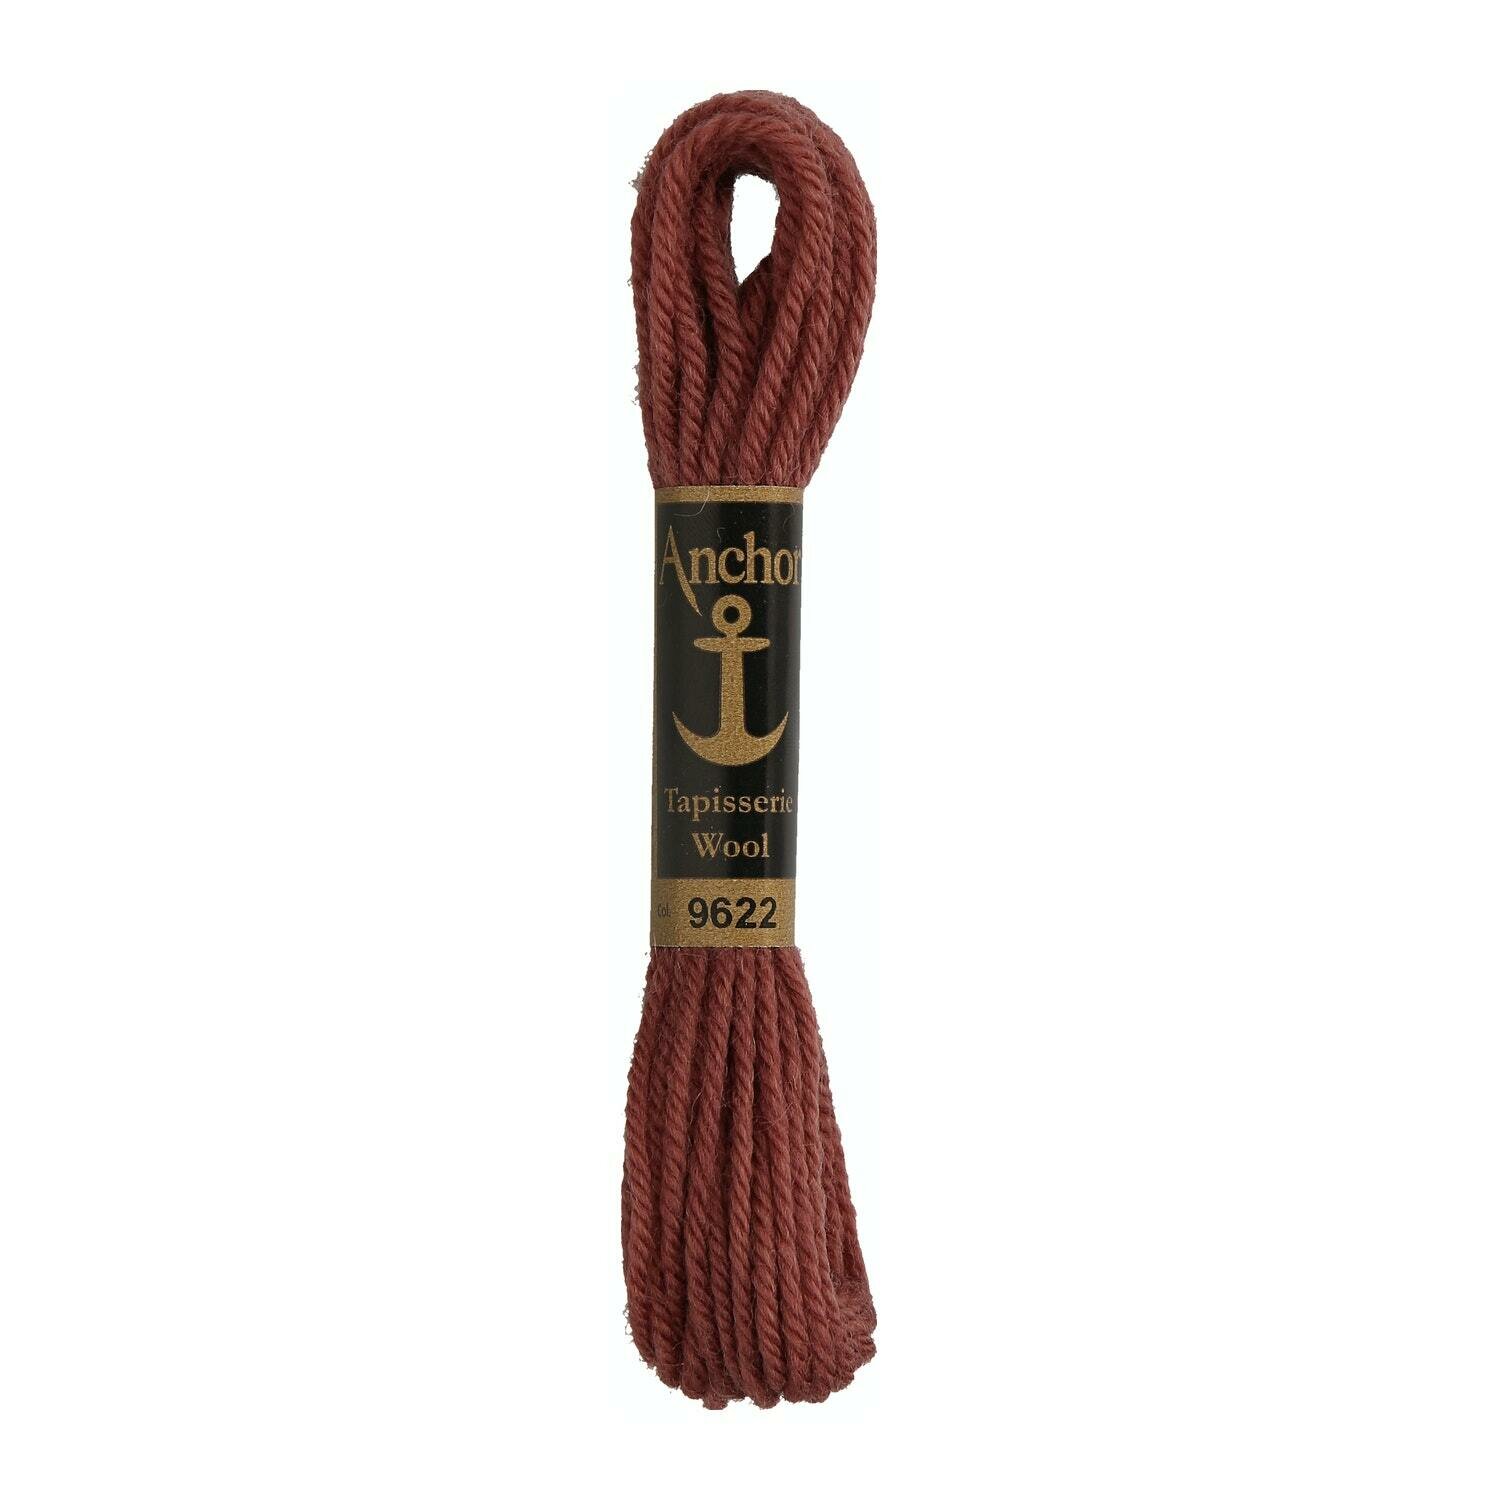 Anchor Tapisserie Wool # 09622